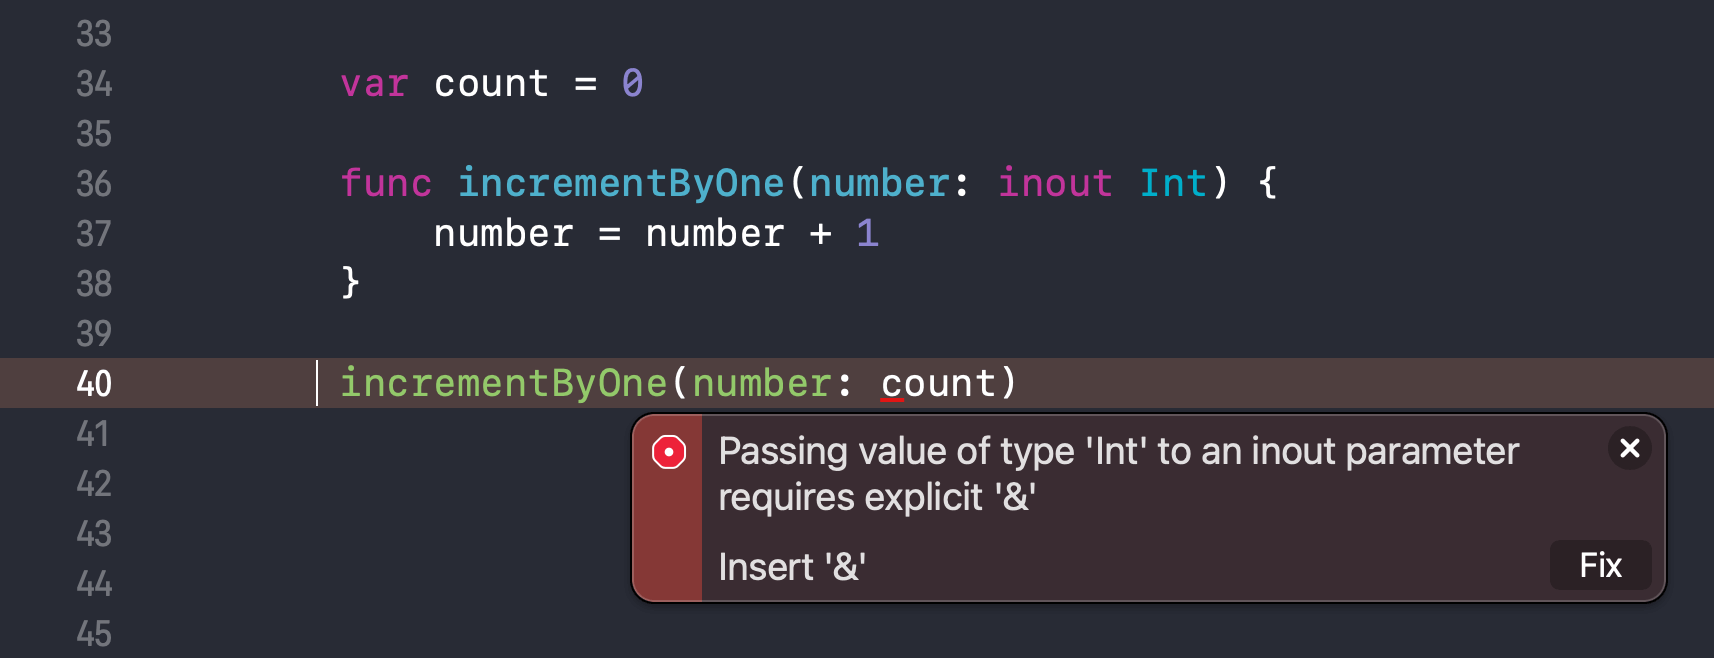 Passing value of type 'int' to an inout parameter requires explicit '&'.